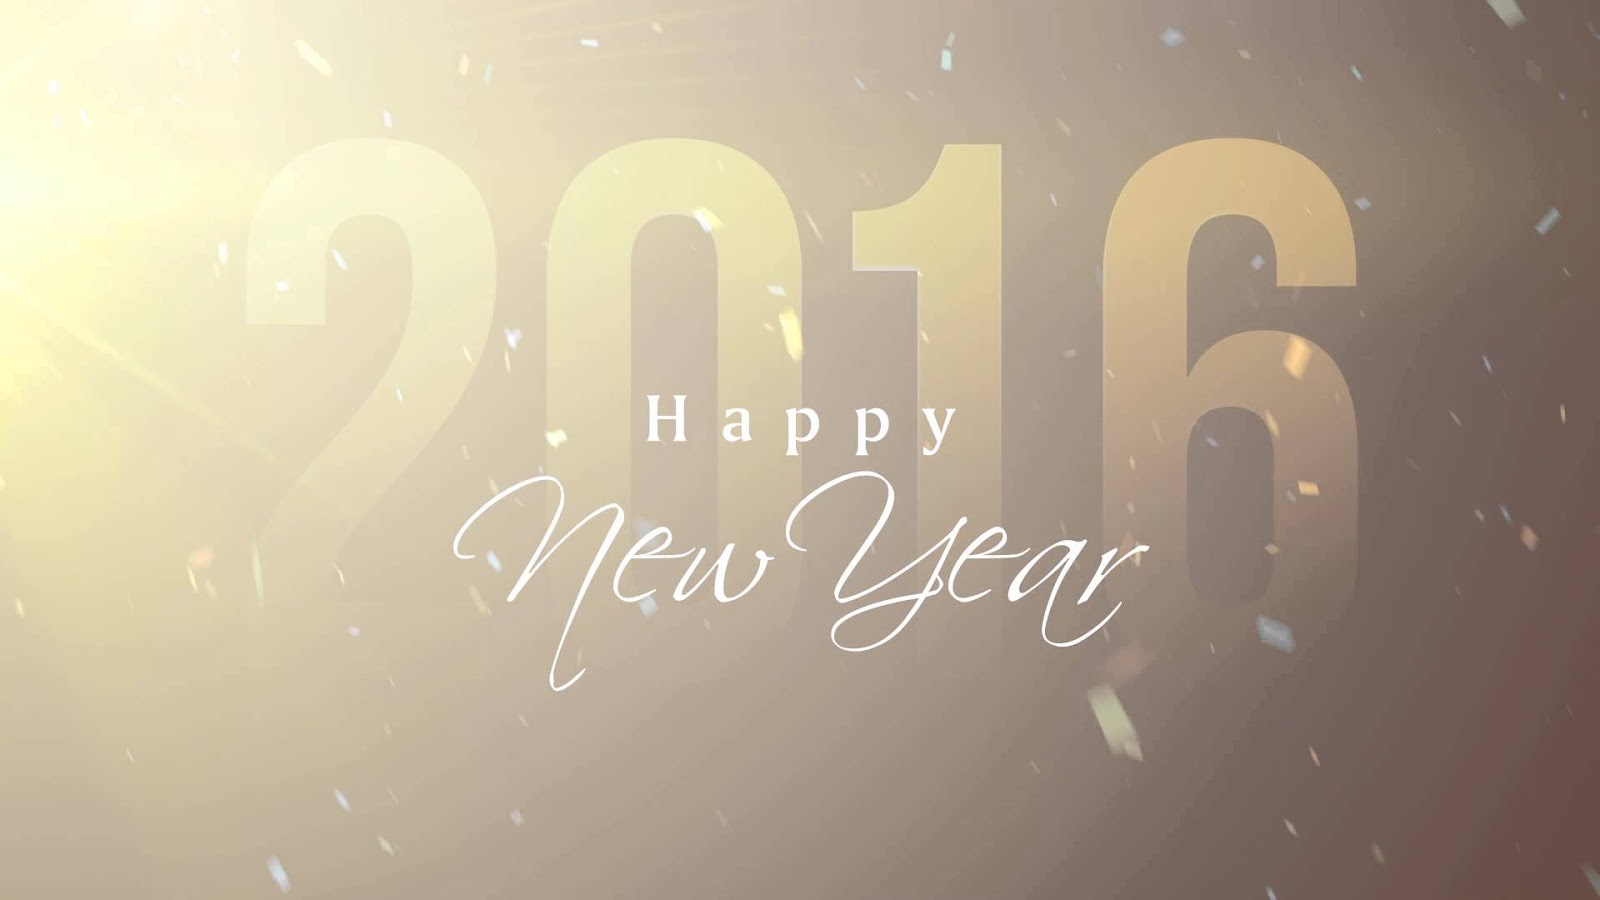 Happy New Year Image Wishes Wallpaper